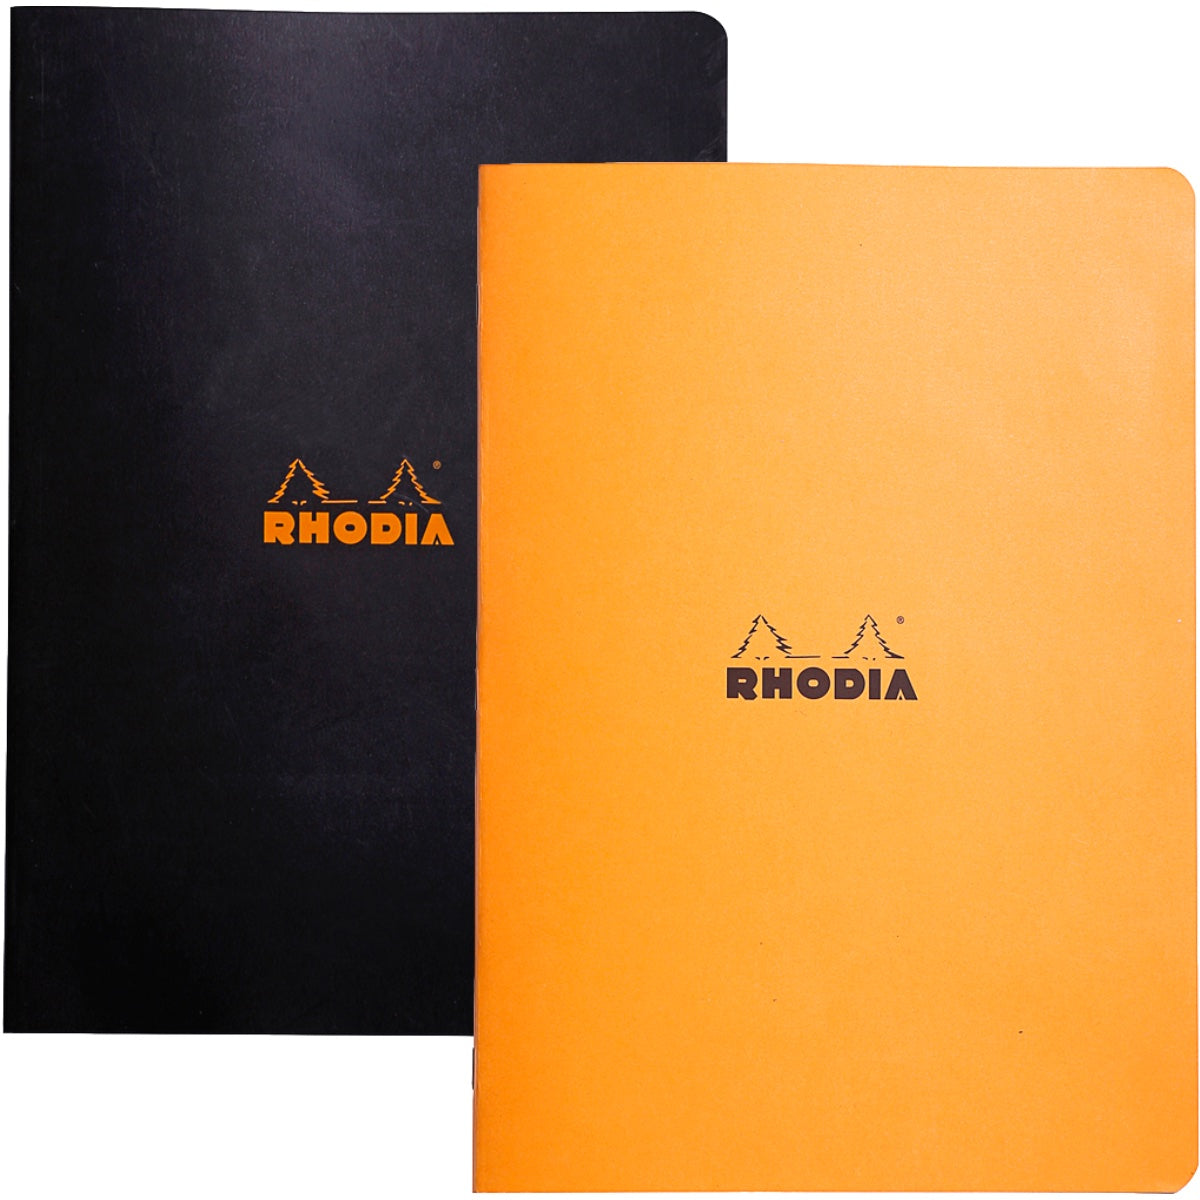 RHODIA Notebook A4, Graph Ruled, 80gsm, 96/pages, Assorted Colors